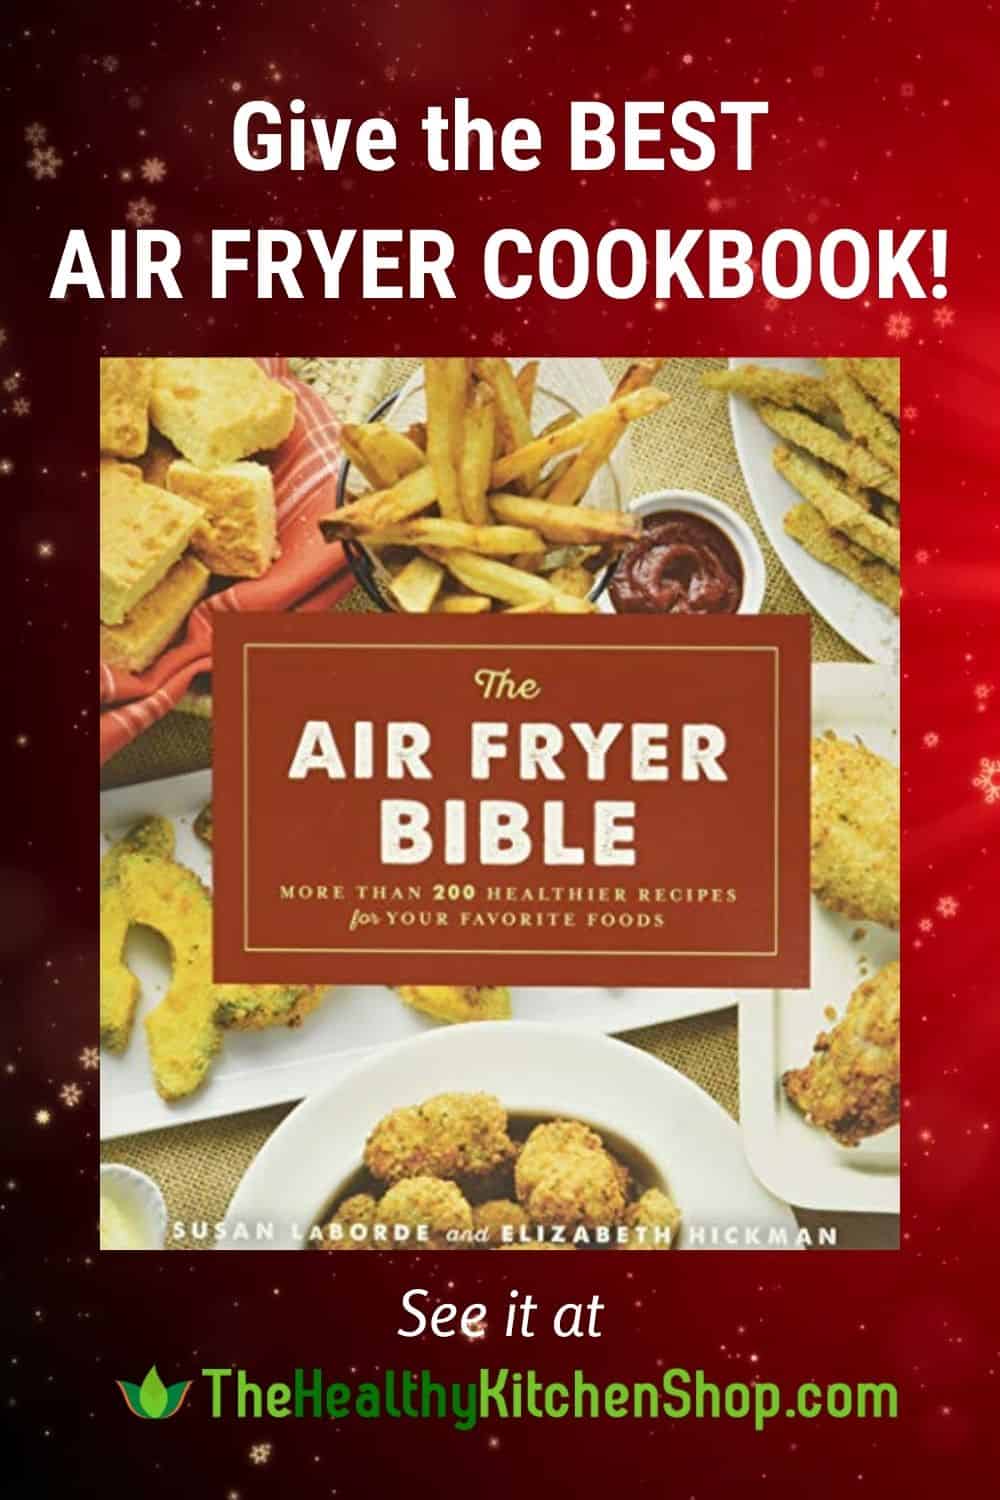 Give the BEST air fryer cookbook, The Air Fryer Bible